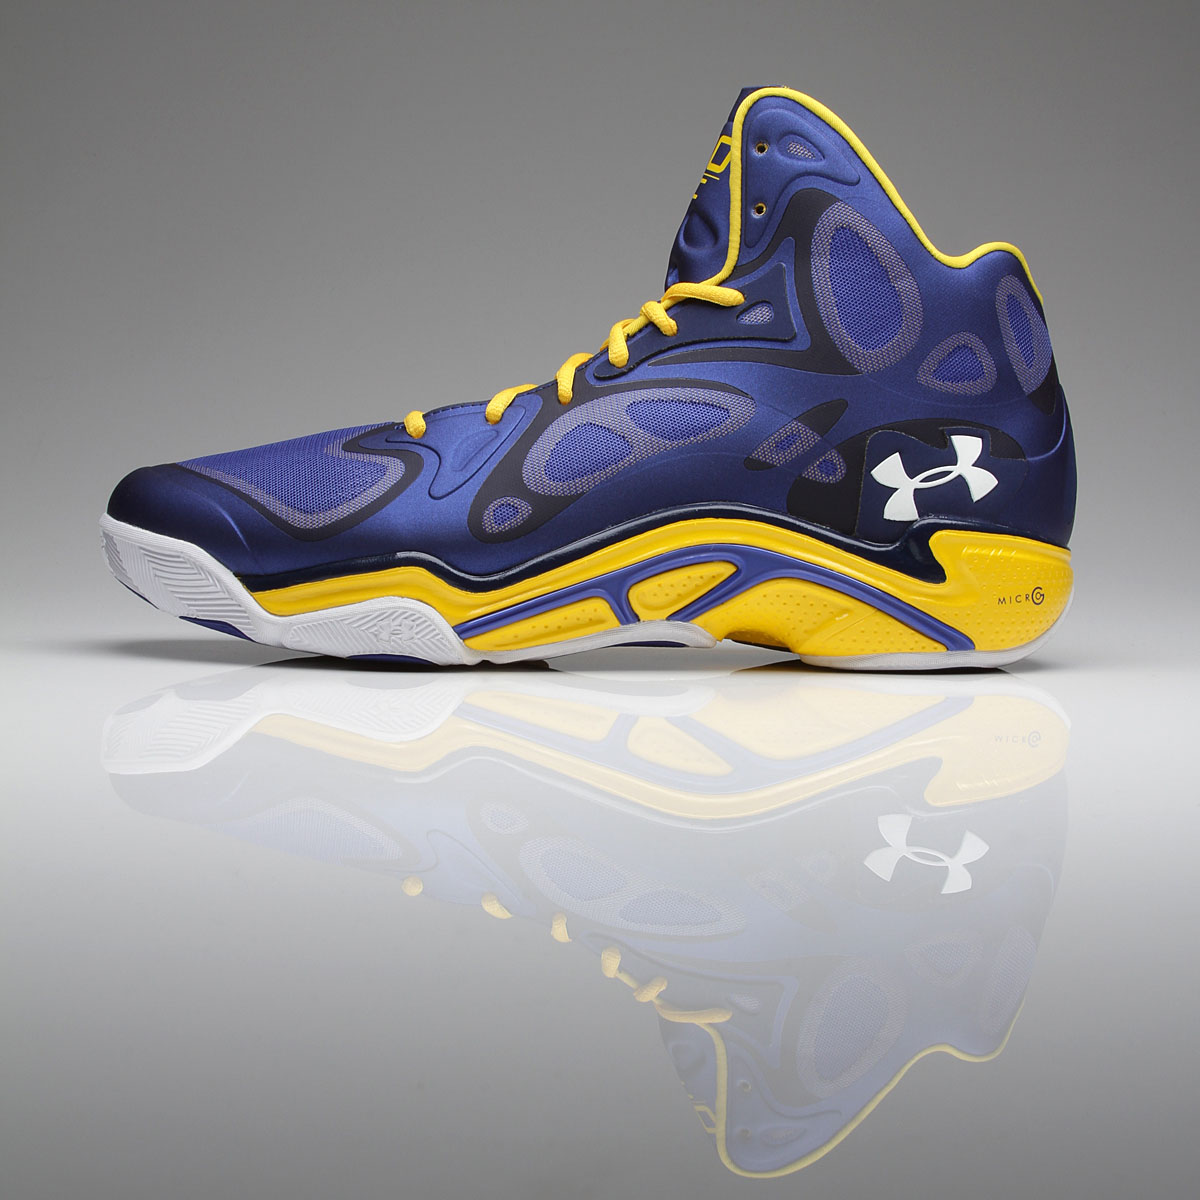 Stephen Curry's Under Armour Anatomix Spawn 'Away' Royal PE // Close-Up (4)